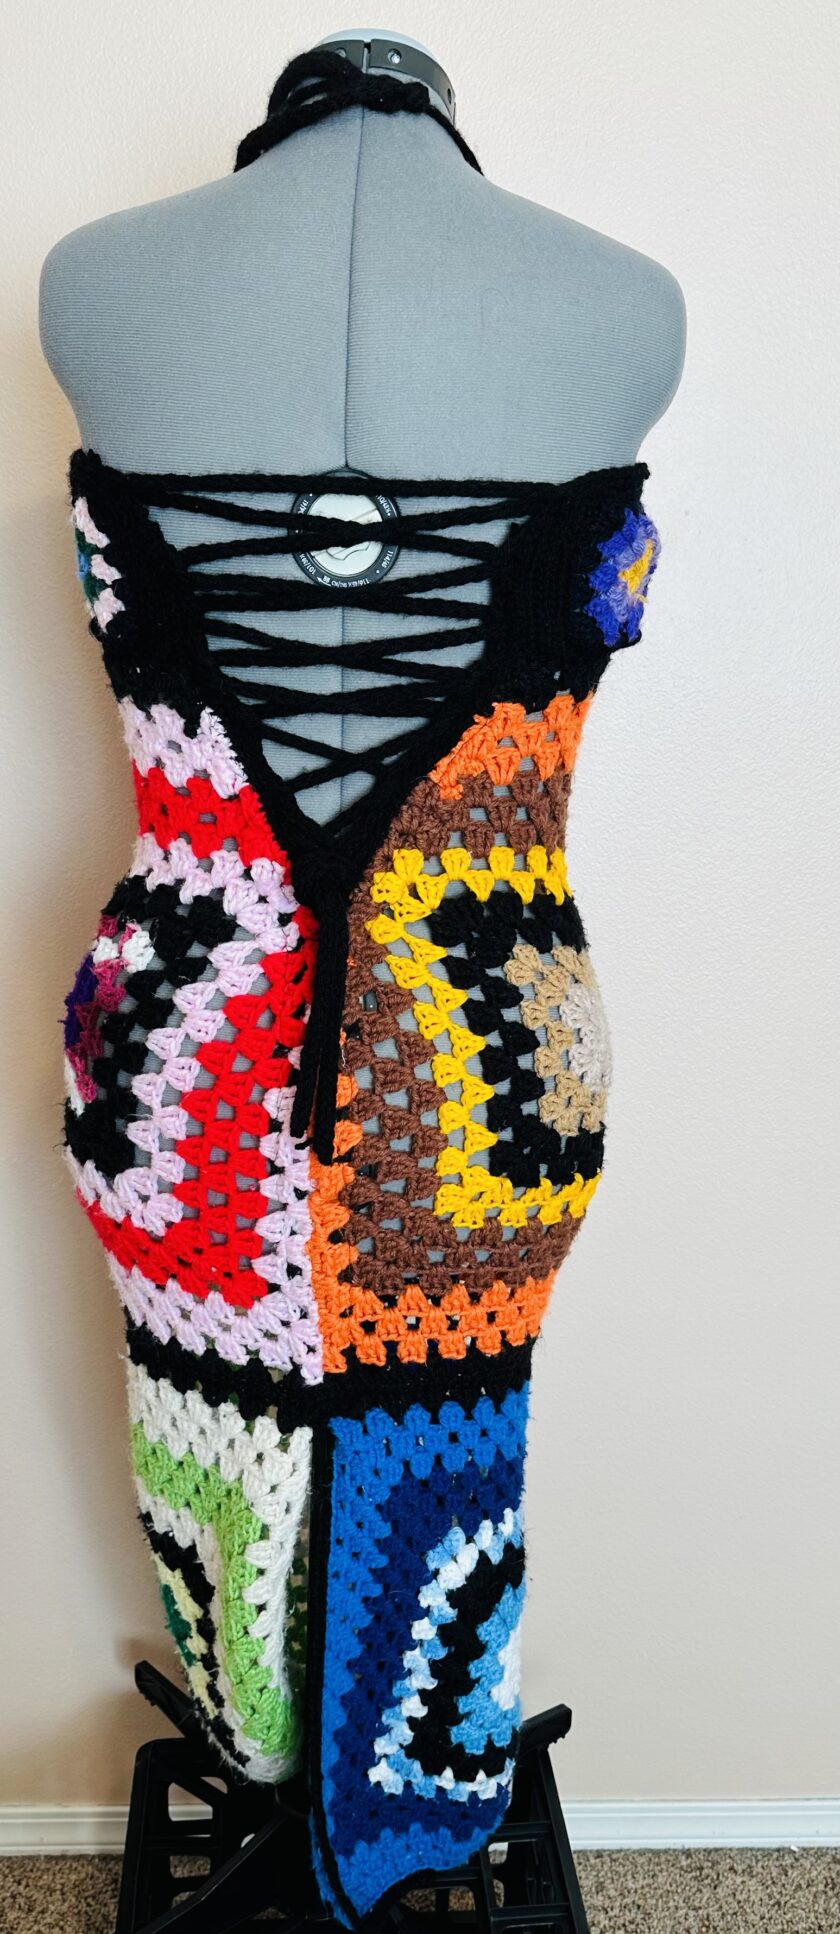 A colorful crocheted dress on a mannequin.